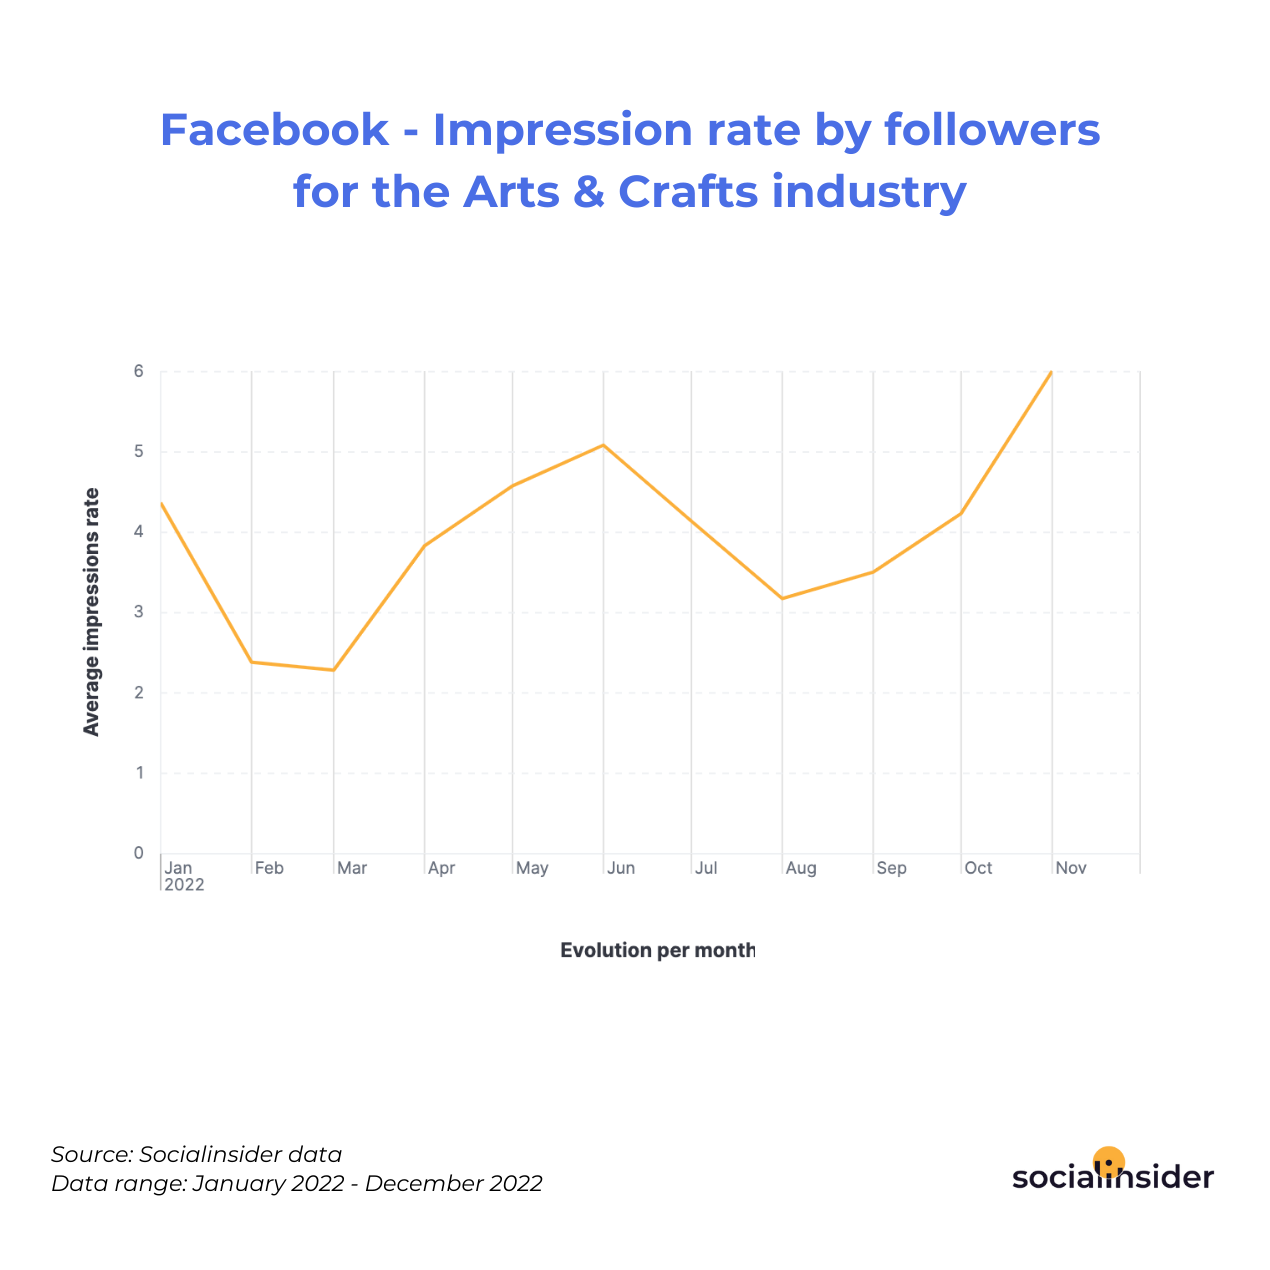 Facebook - Impression rate by followers for the Arts & Crafts industry 